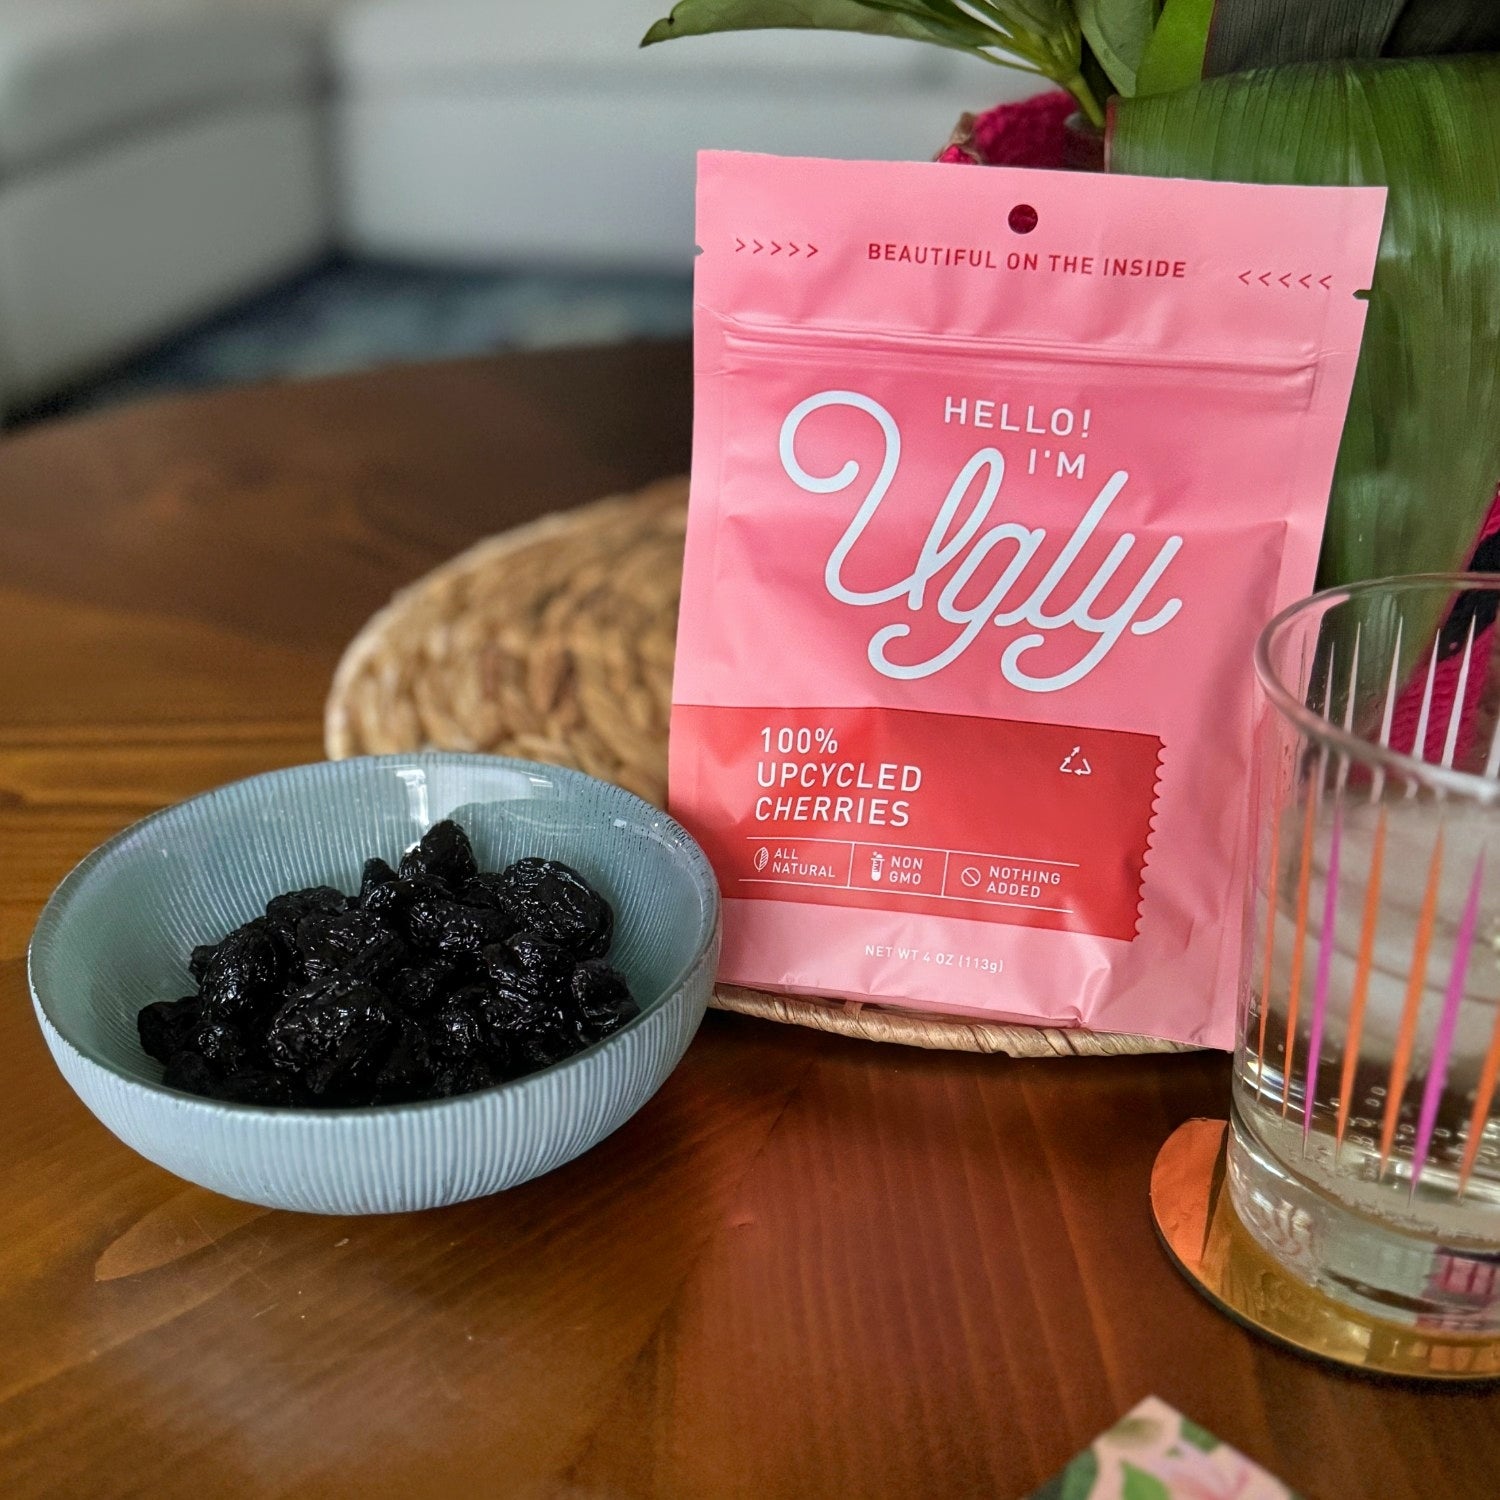 A dish and the bag of dried cherries from the Ugly Company next to a cocktail